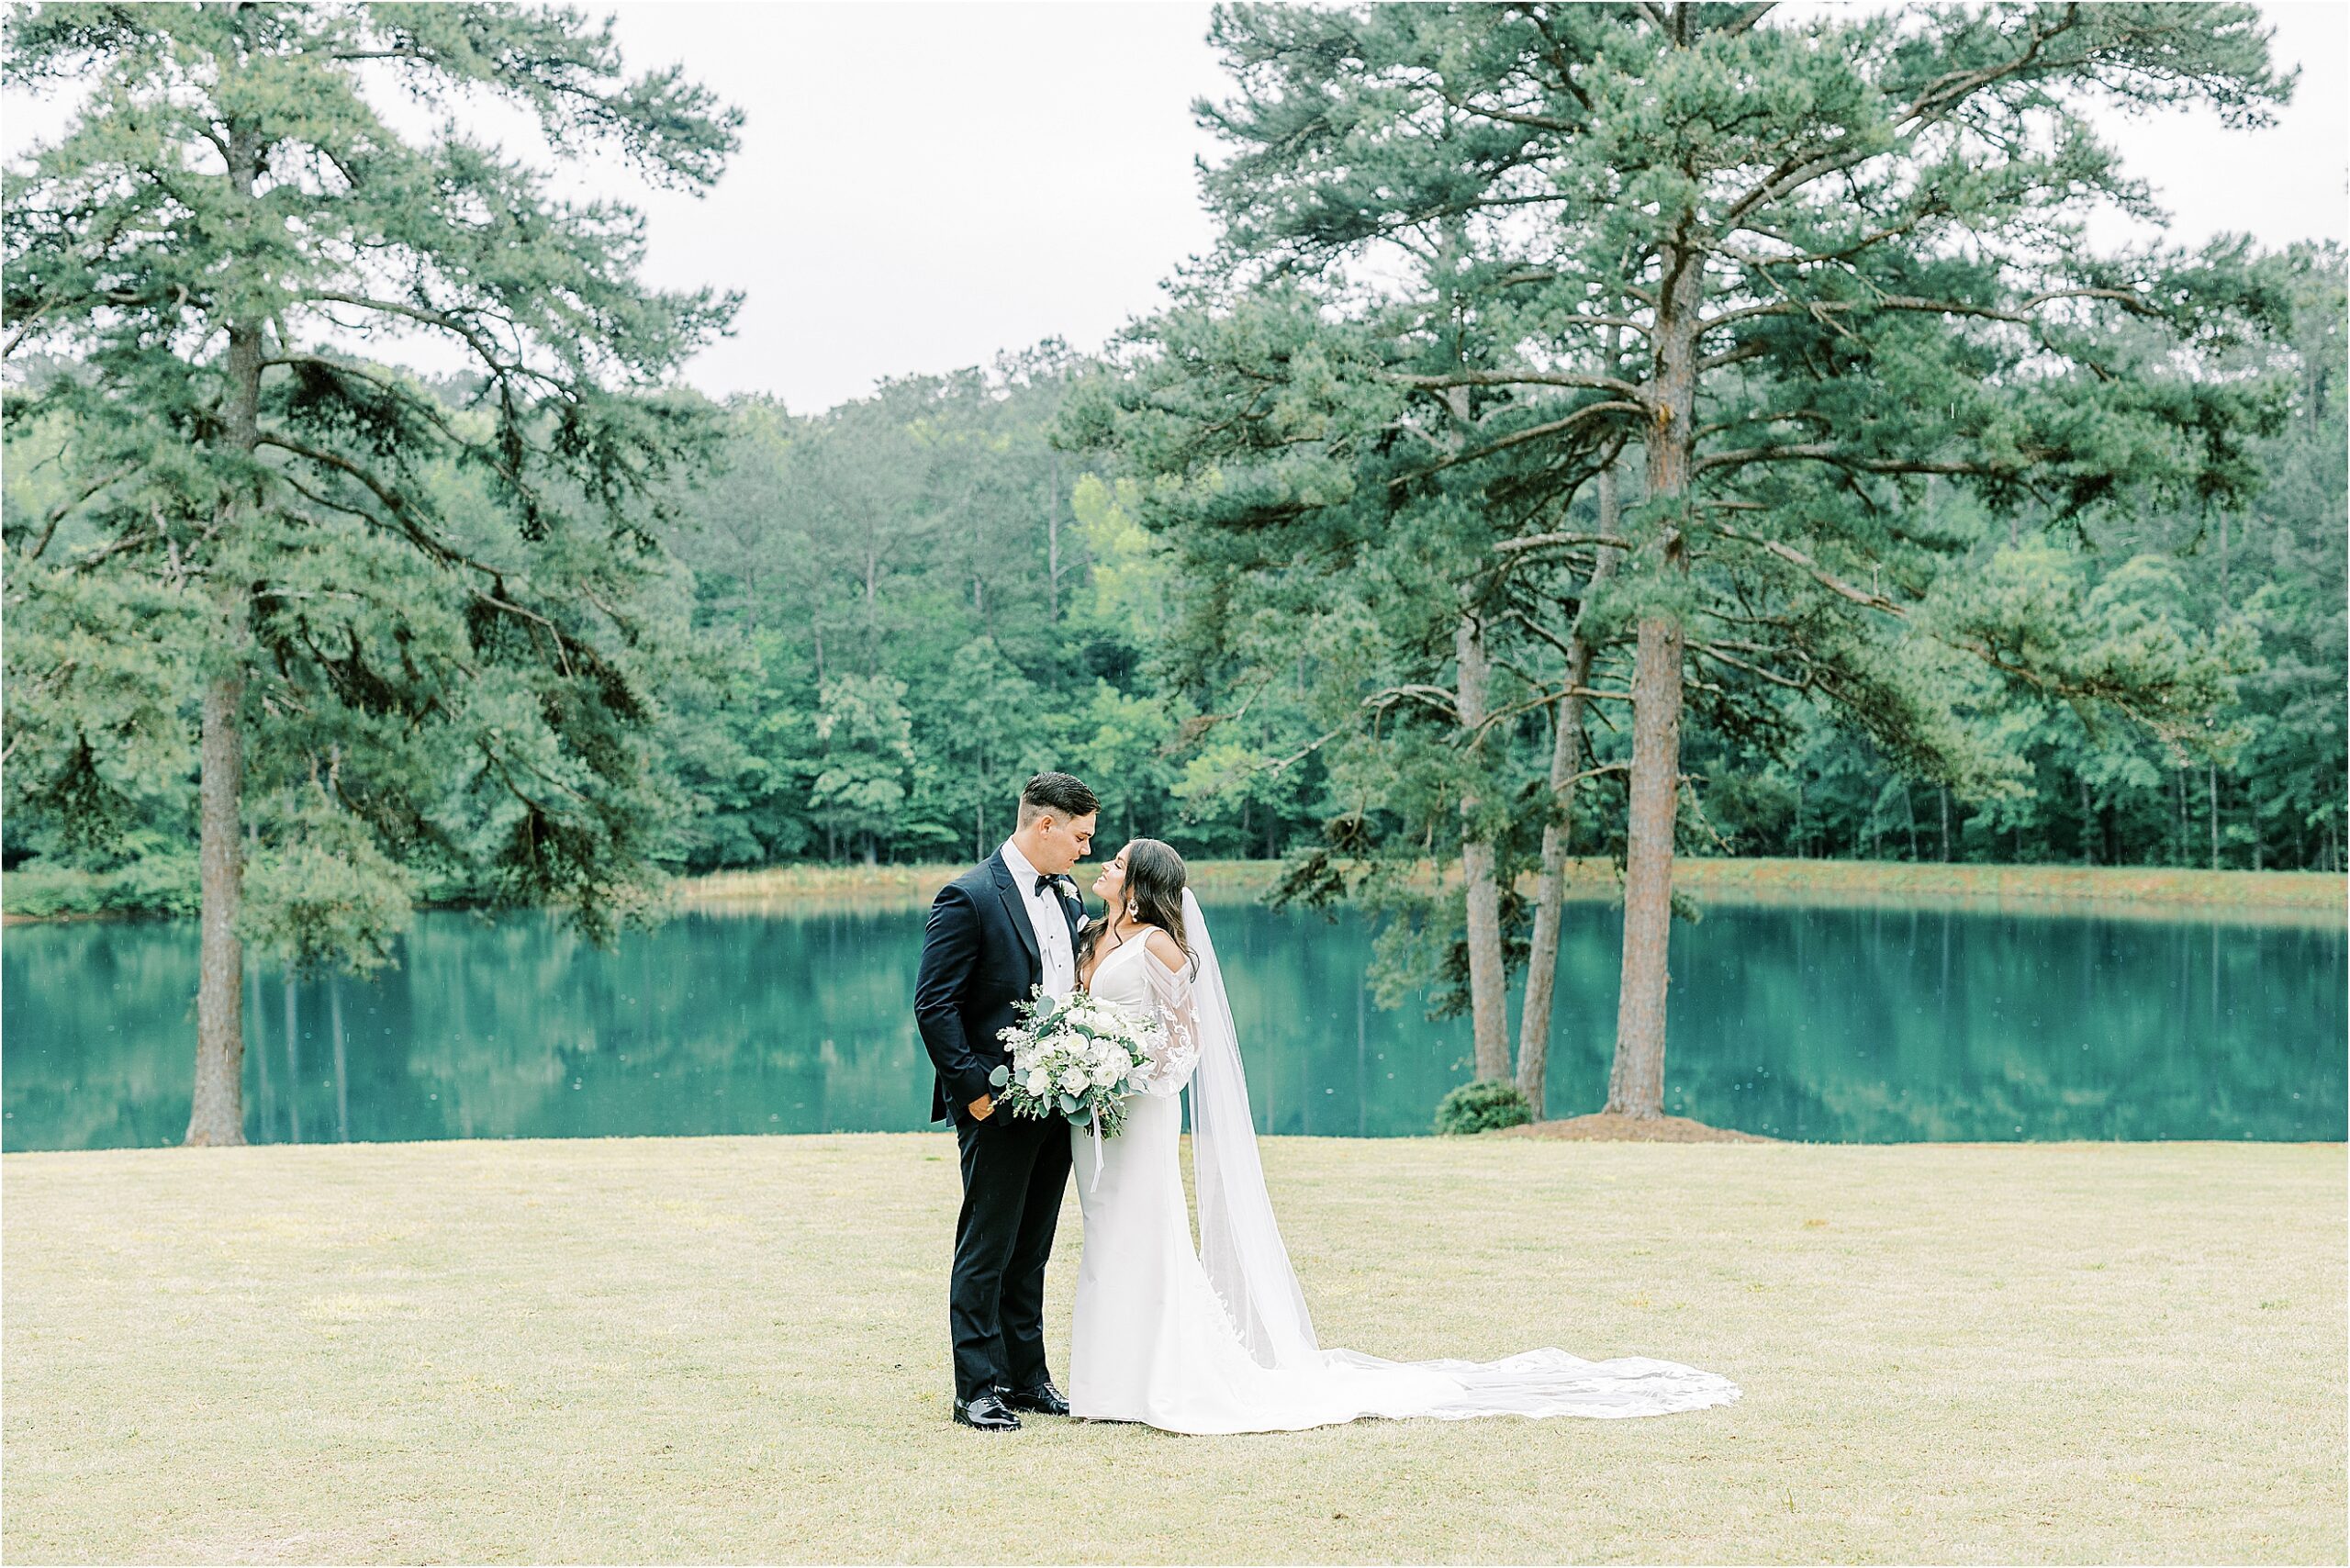 Bride and groom looking at one another, standing in front of pond